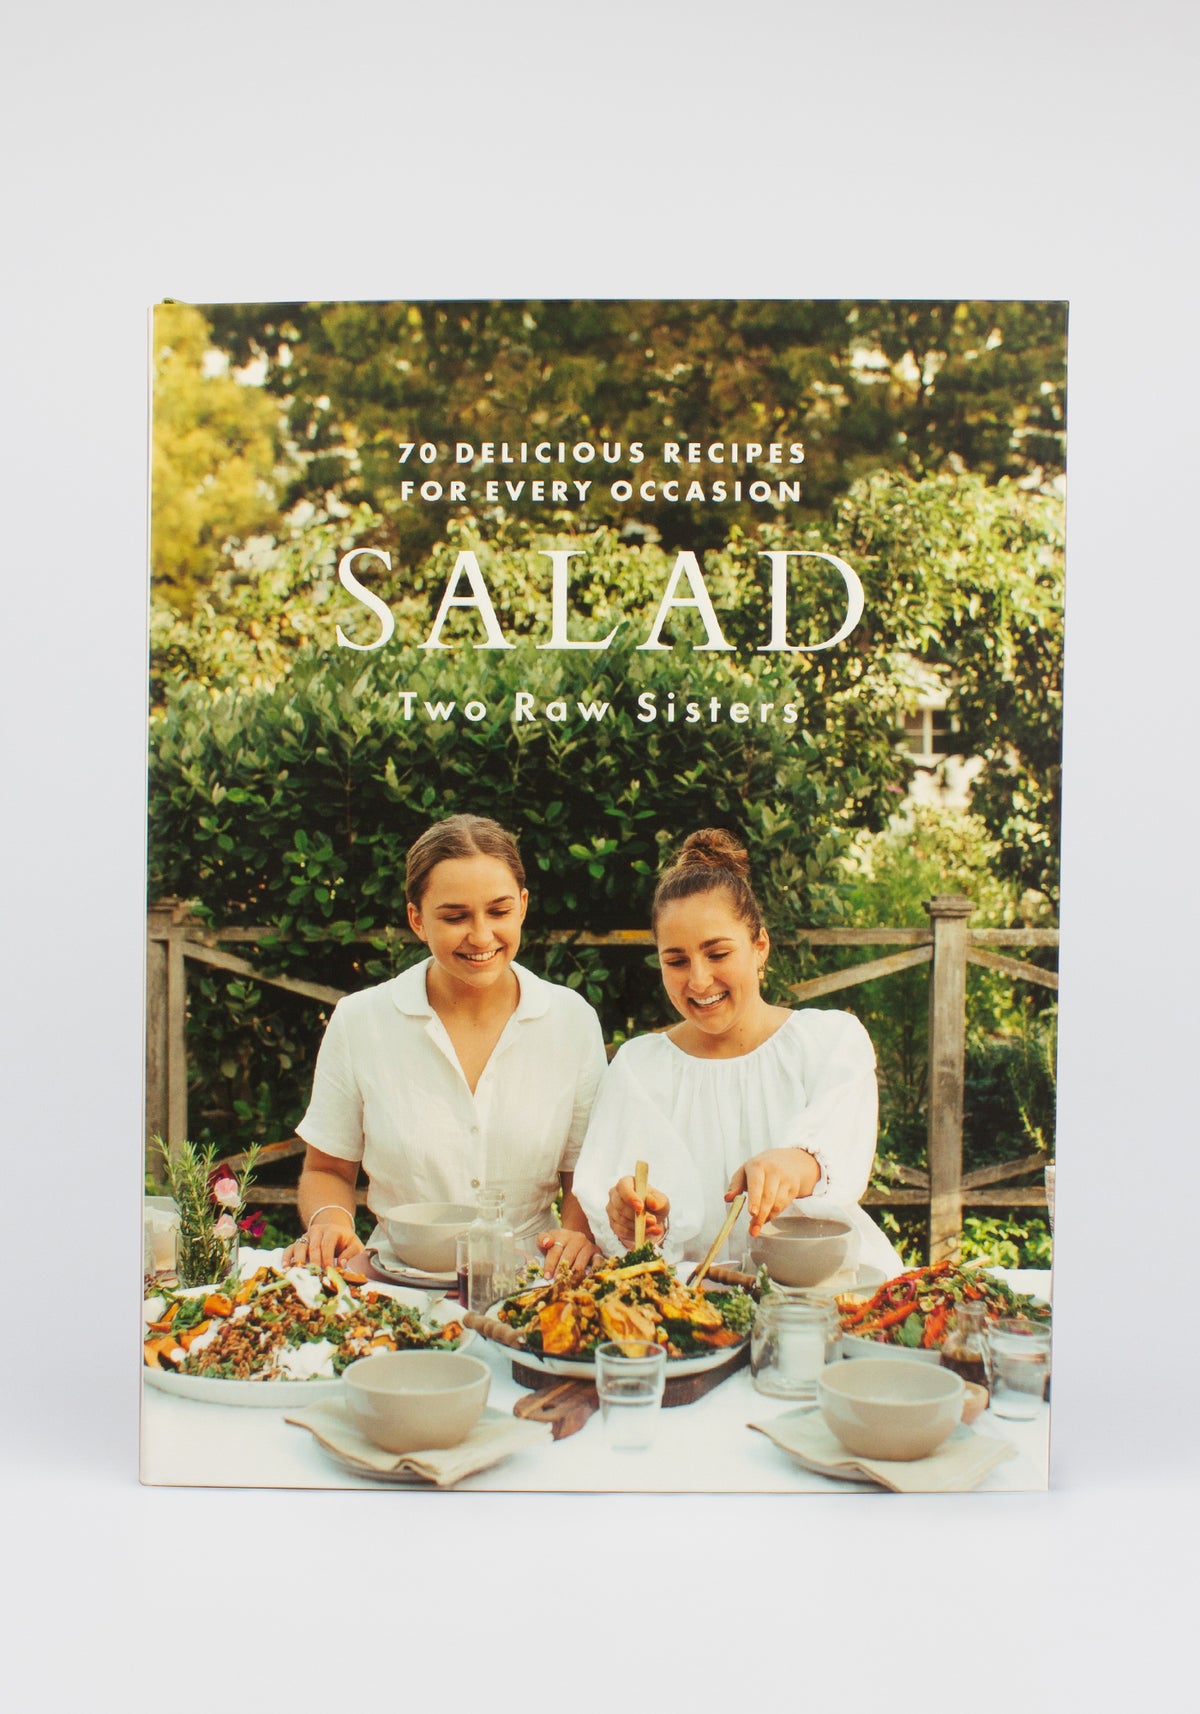 SALAD - by Two Raw Sisters